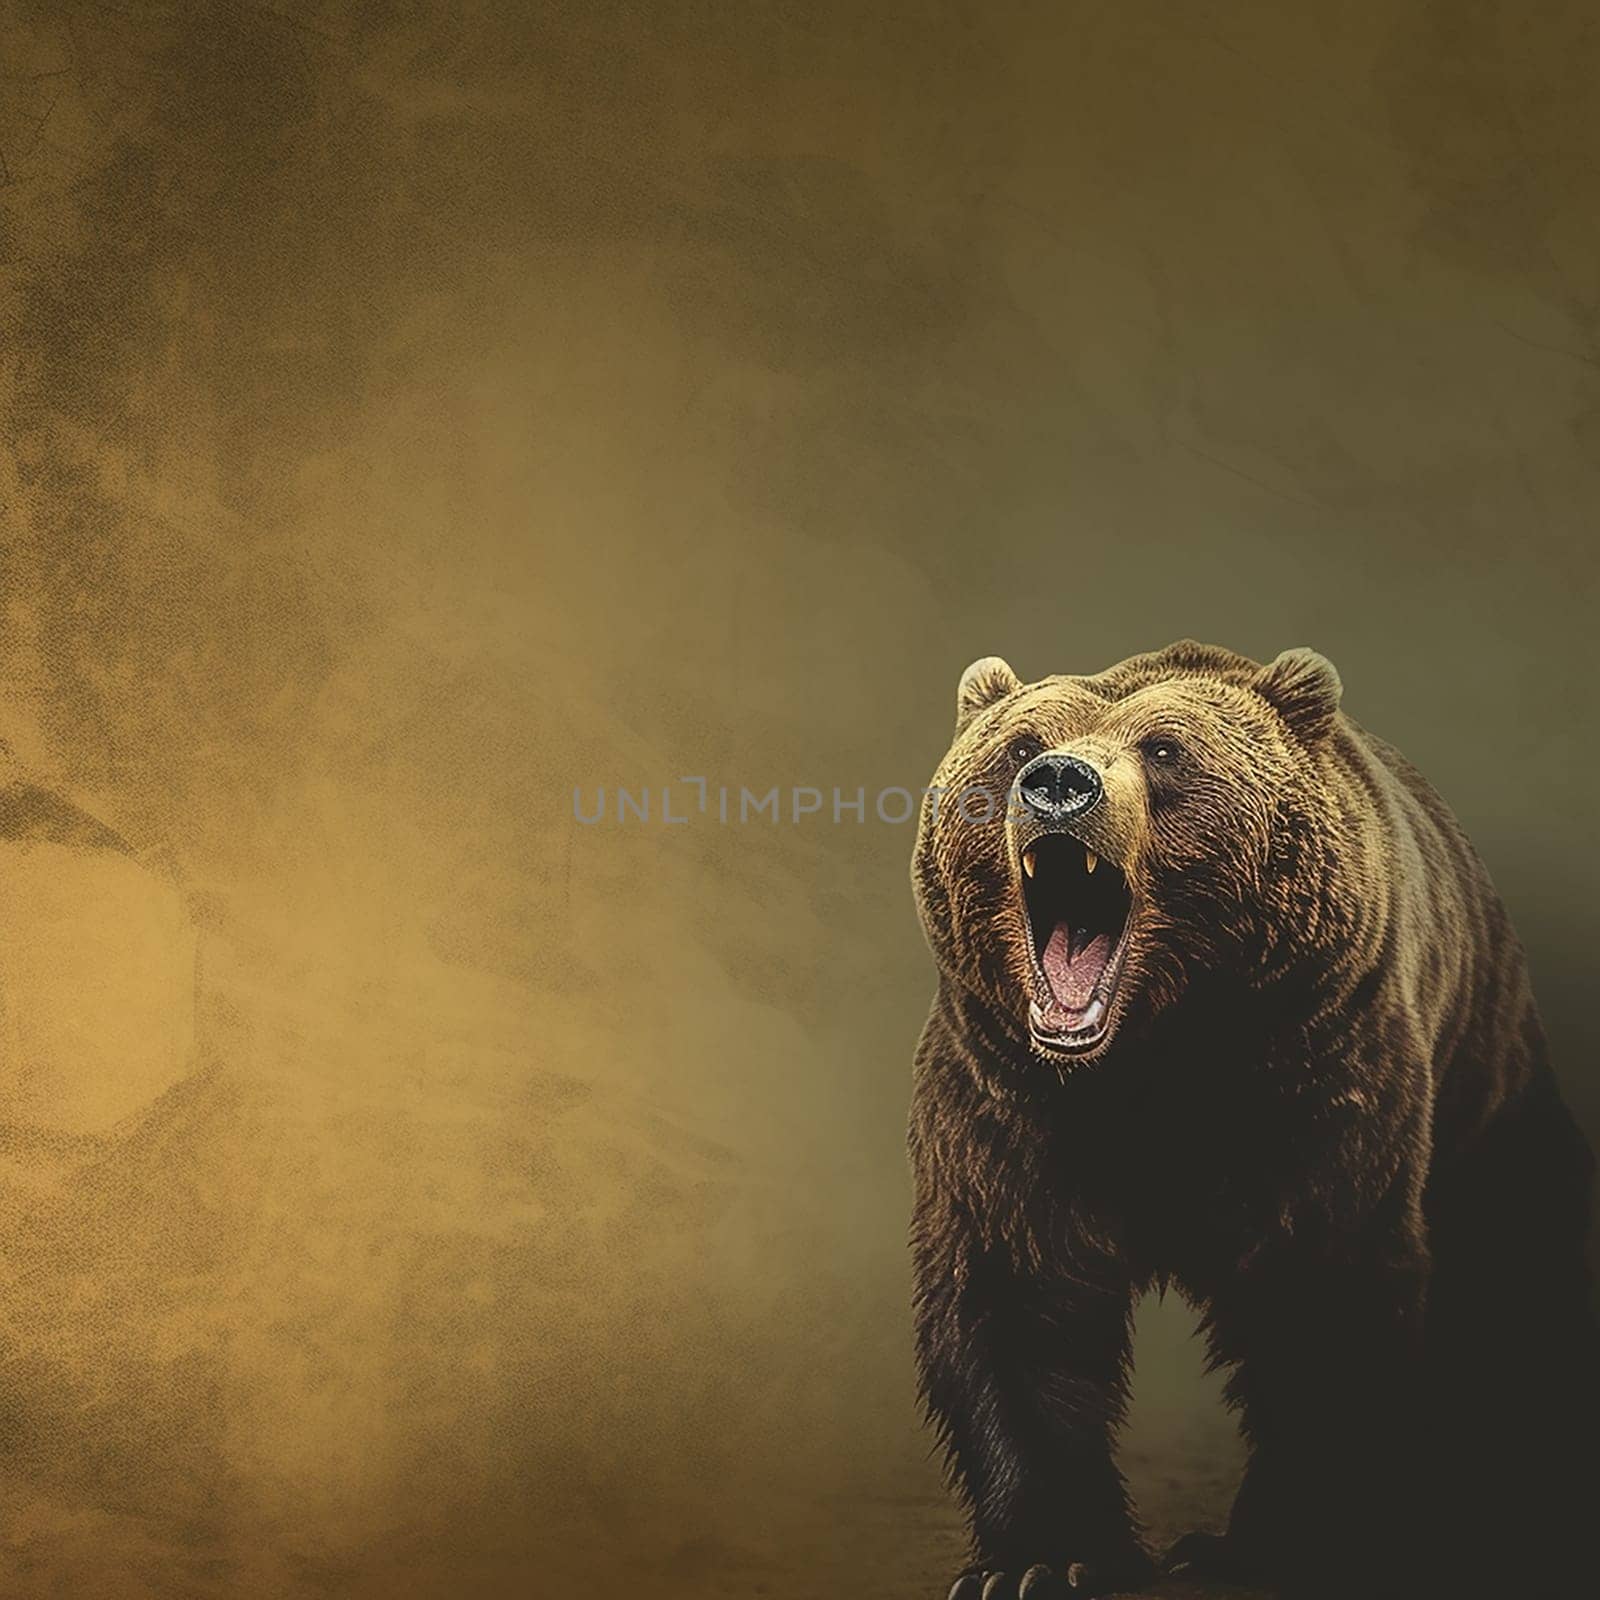 A photo of an aggressive brown bear roaring showing teeth, wild animal, brown background